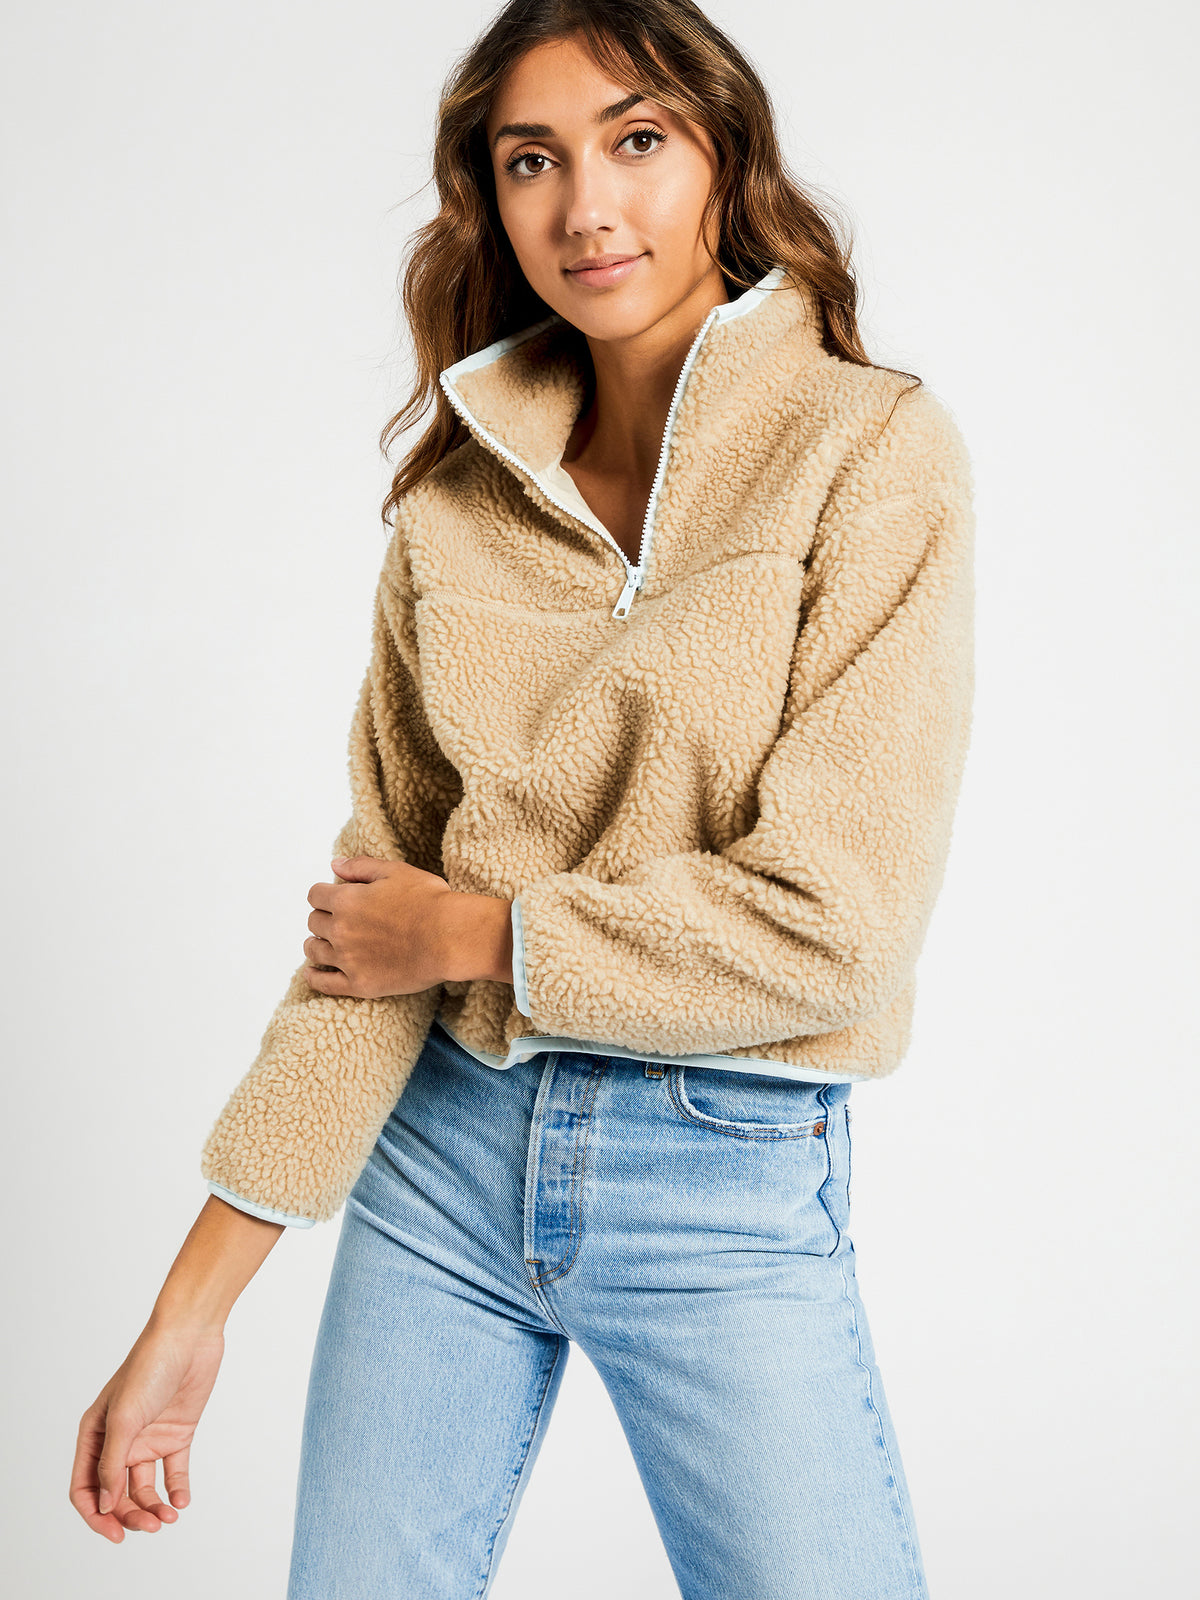 Solane Sherpa Pullover in Oyster Gray